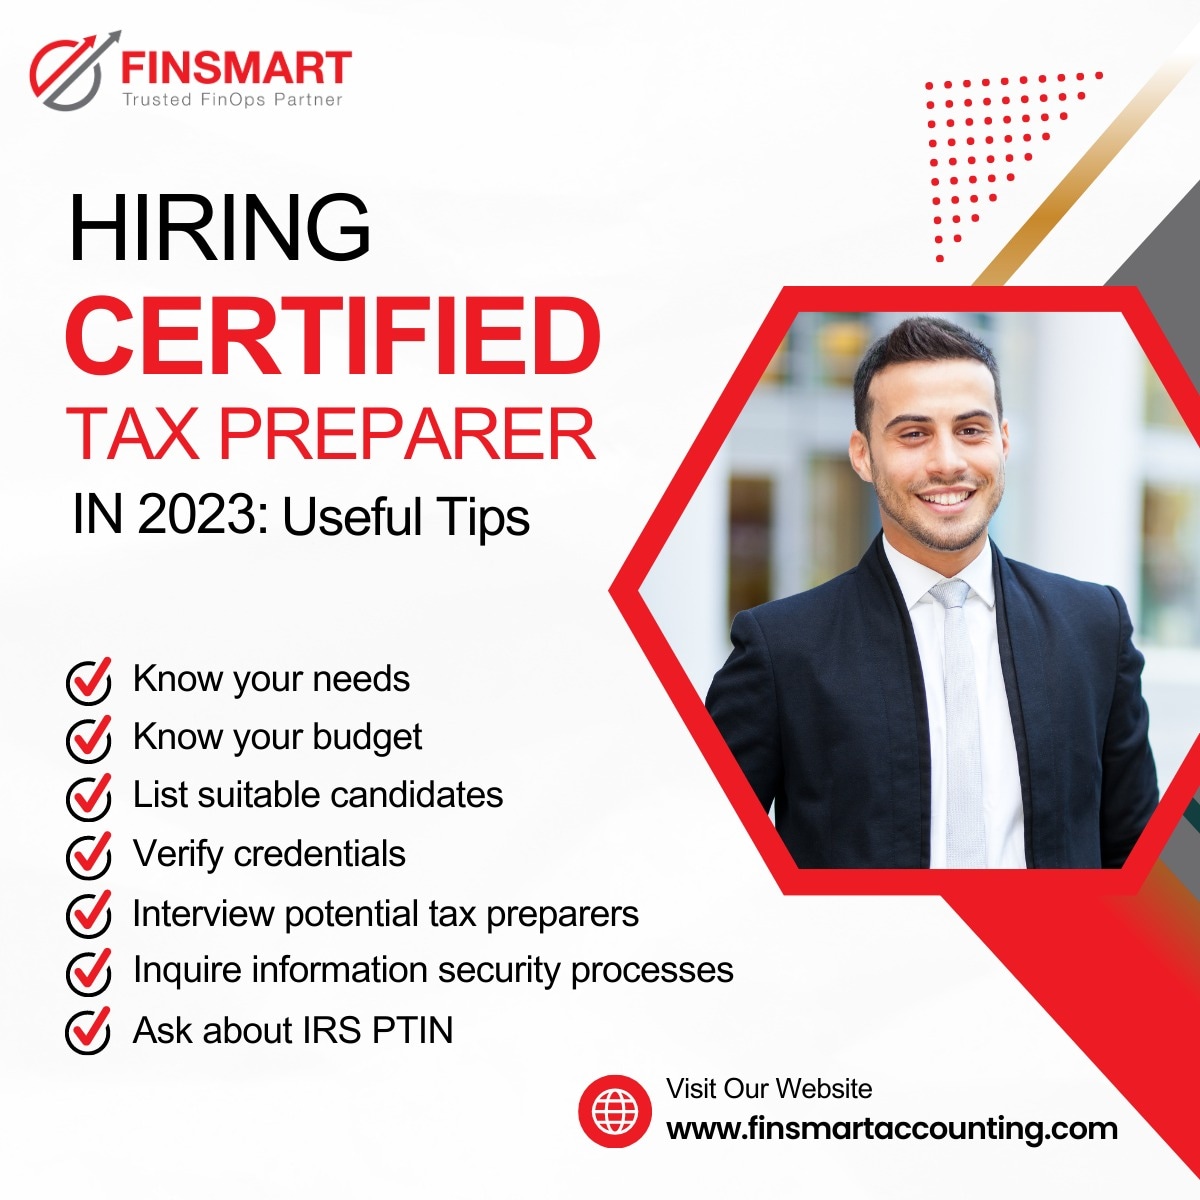 See these usefull tips for hiring Certified Tax Paperer in 2023.

Learn more:  bit.ly/3n6EONb

#RightTalent #Hiring #Accountants #TaxPaperer #FinsmartAccounting